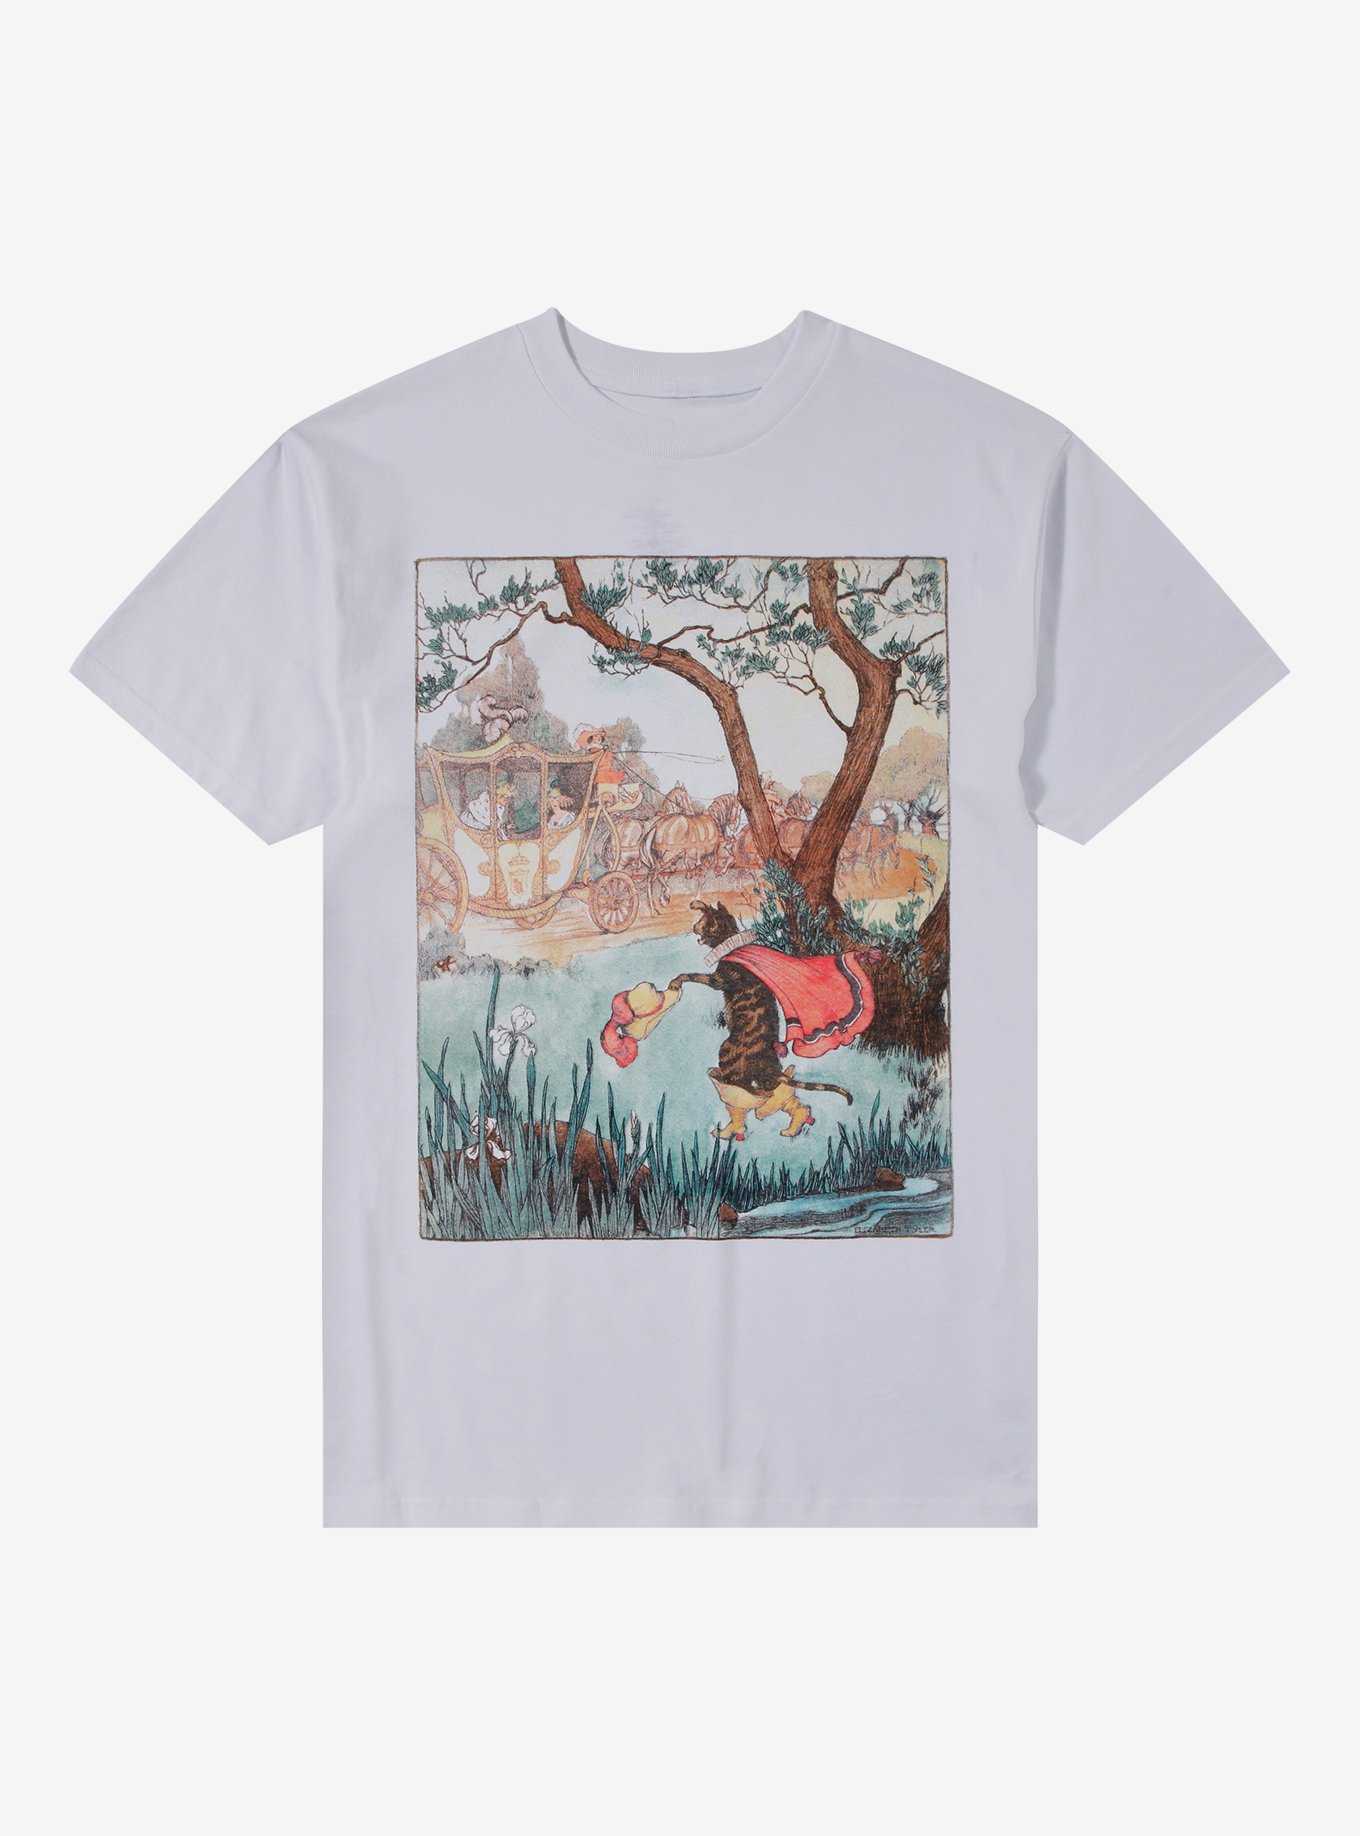 Puss In Boots Fairy Tale River Scene T-Shirt, , hi-res